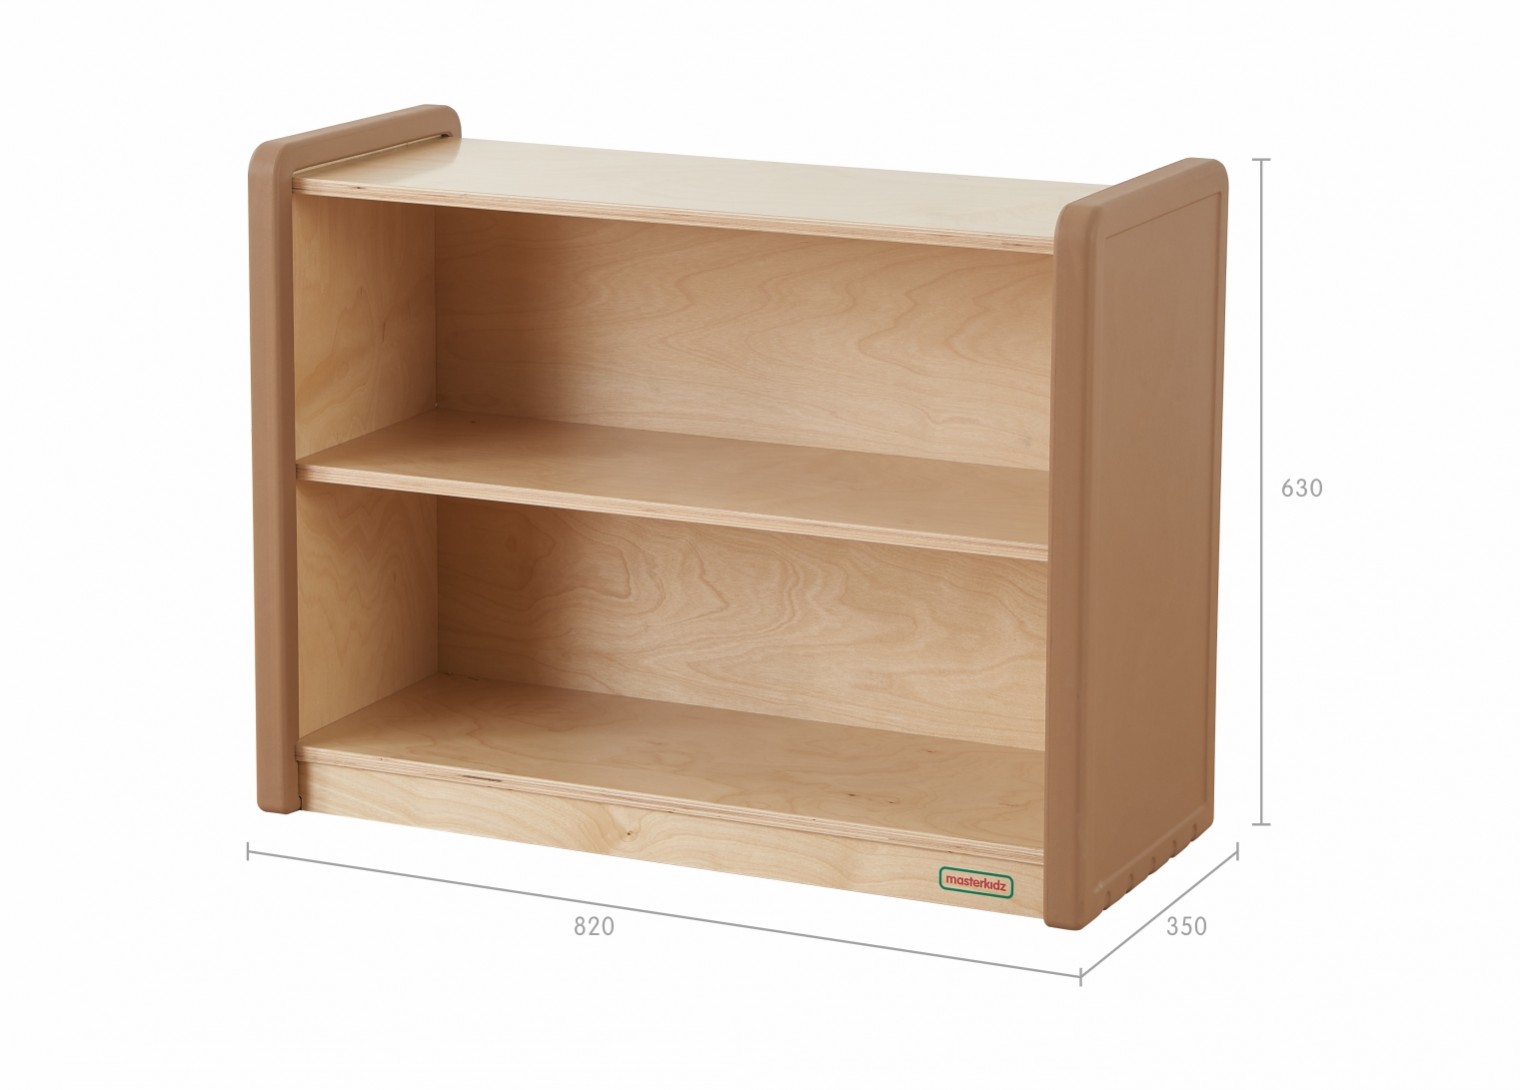 SoftEdge Toddler Play Center  620H x 800L Shelving Unit - Wooden Back